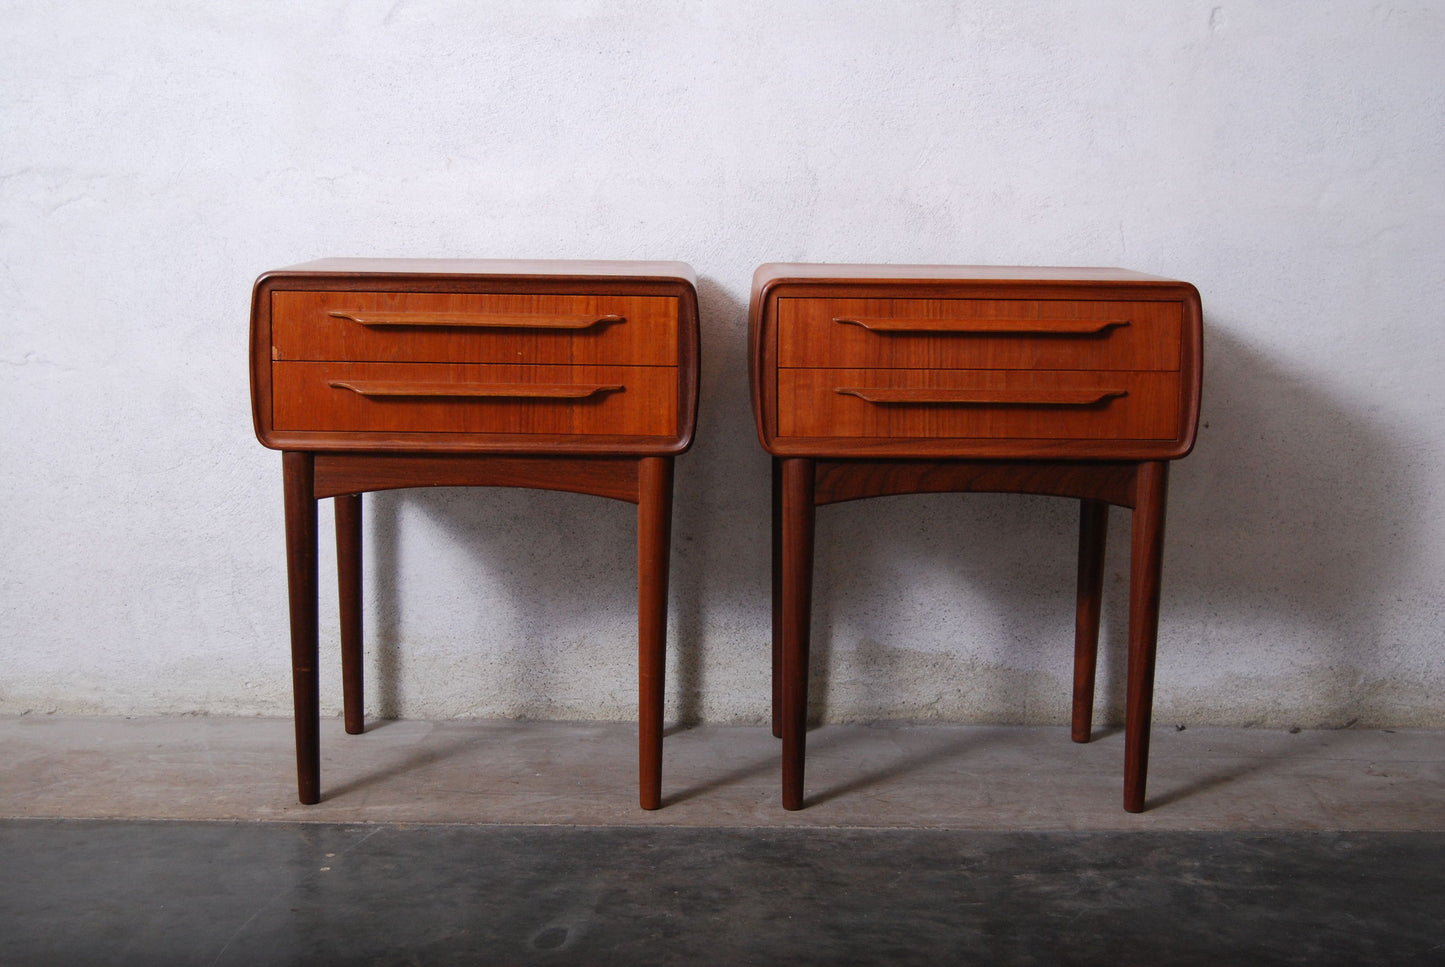 Pair of bedside tables by Johannes Andersen